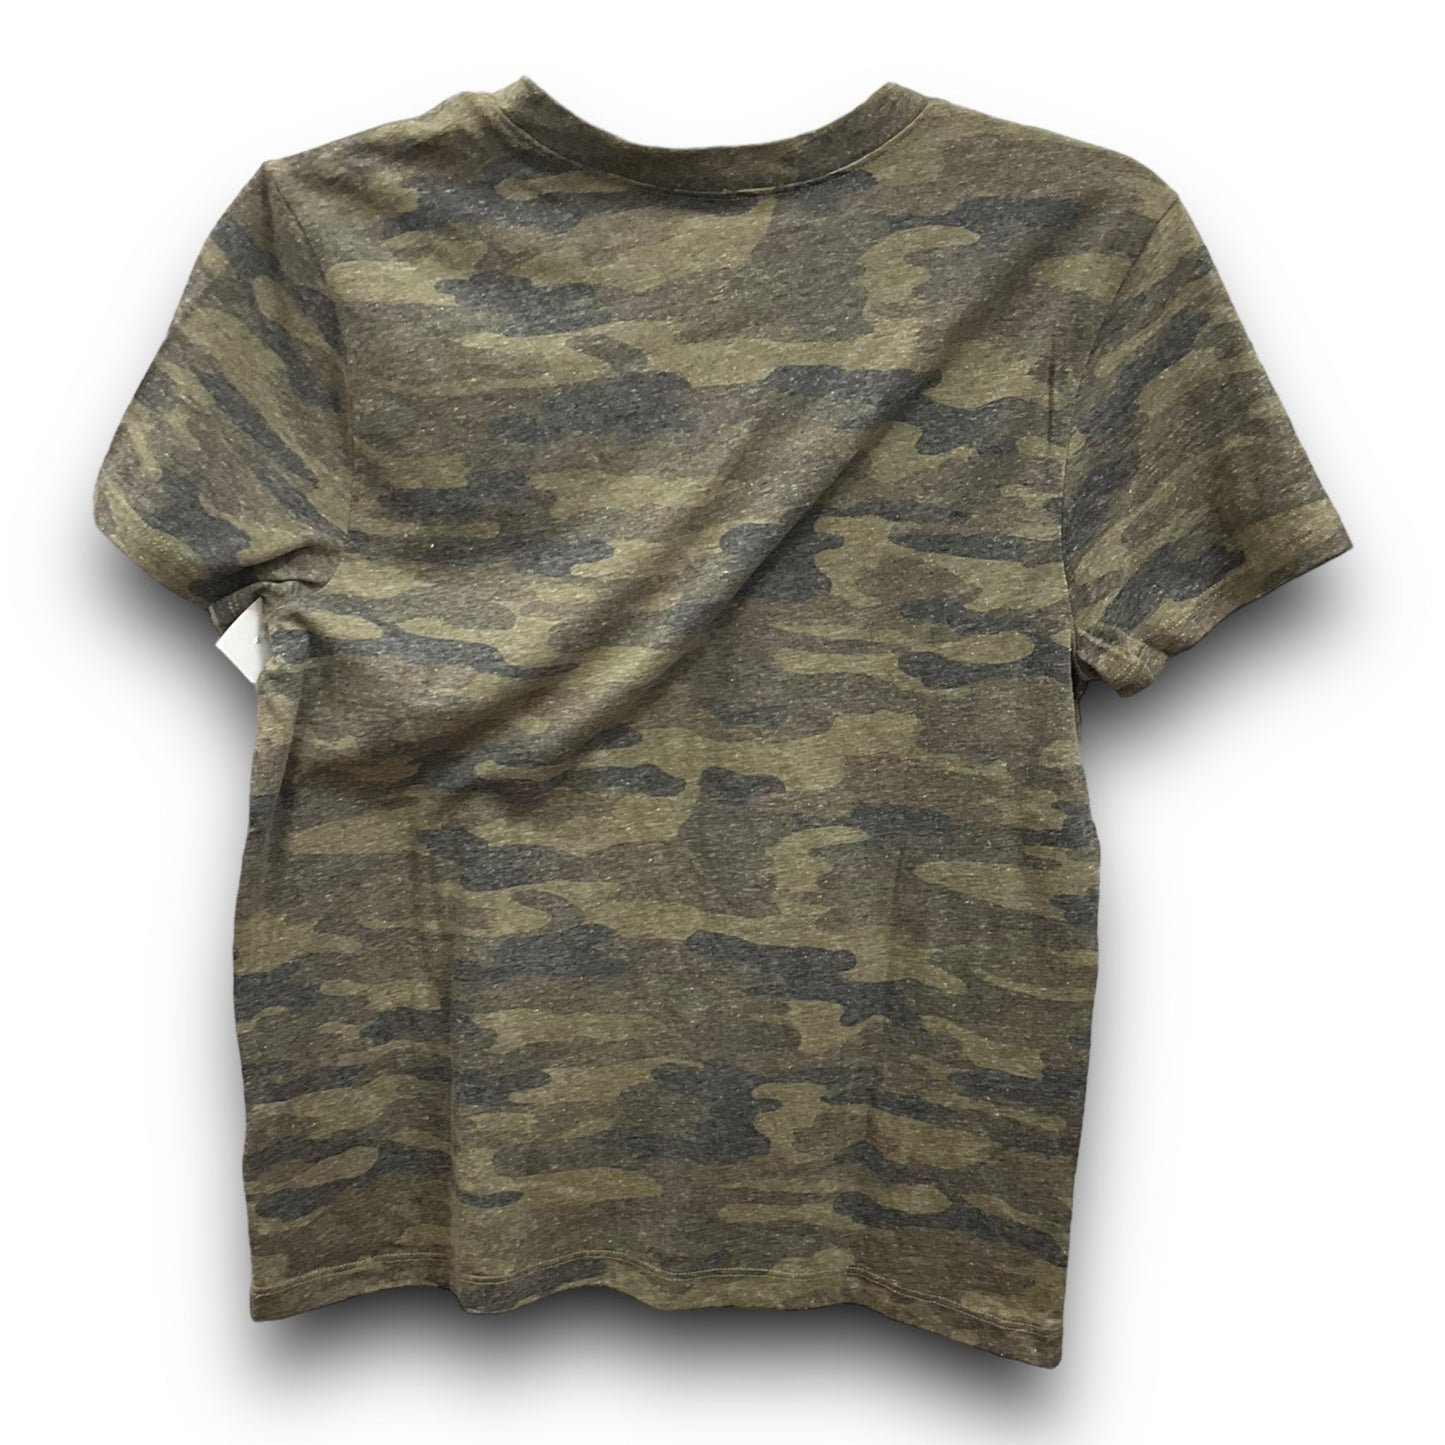 Camouflage Print Top Short Sleeve Basic Lucky Brand, Size S